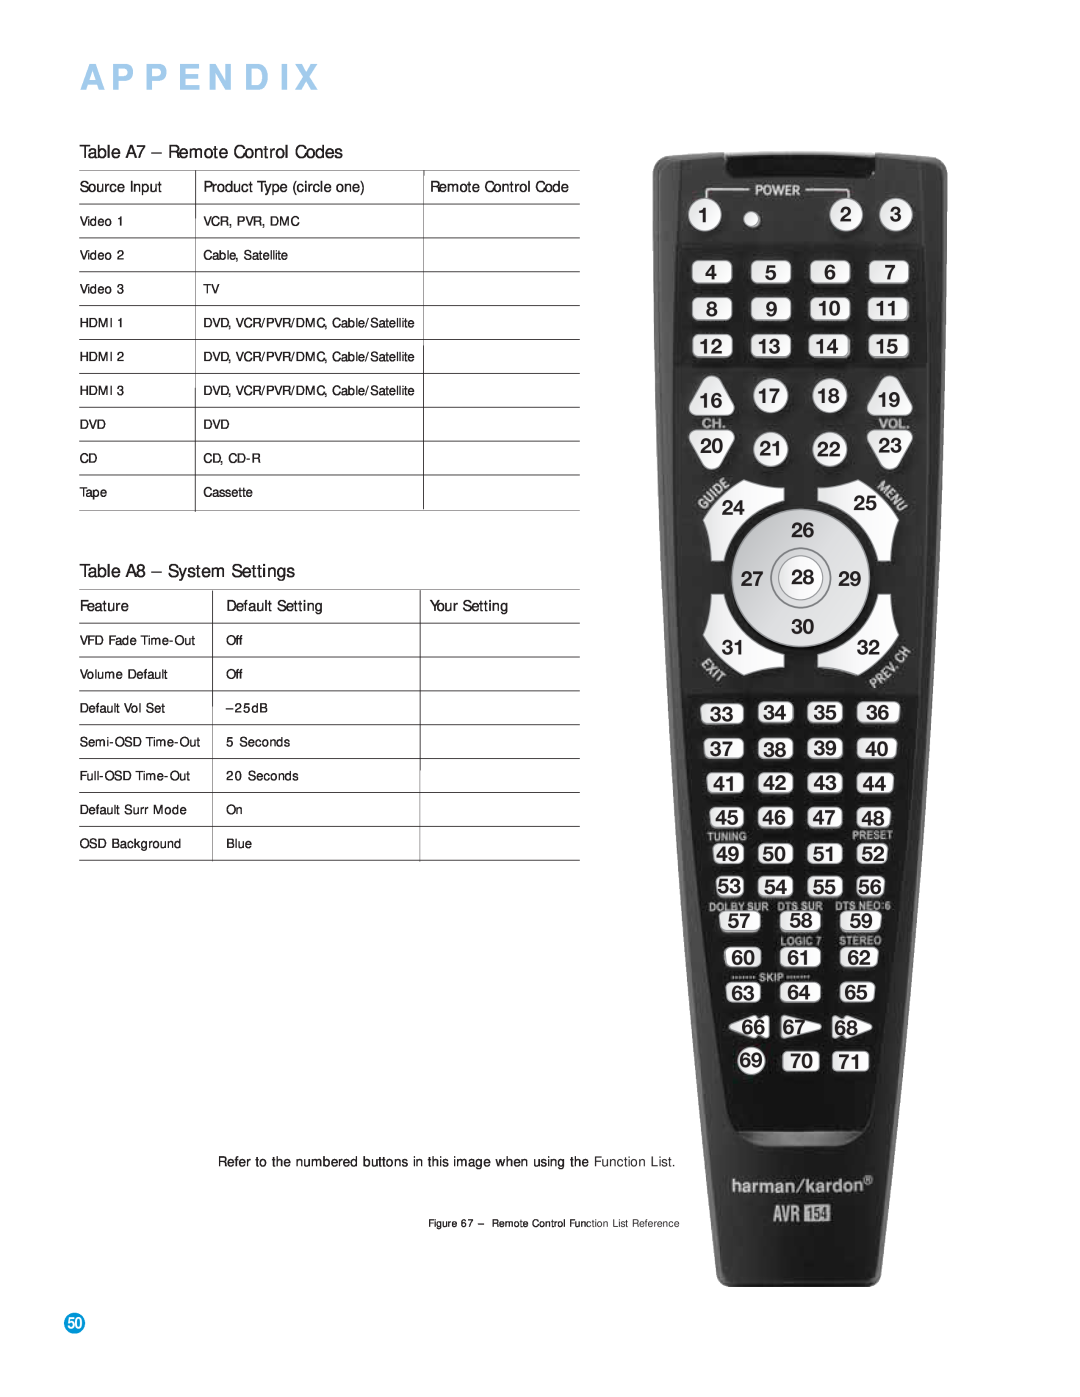 Harman-Kardon AVR 154 owner manual Table A7 - Remote Control Codes, Table A8 - System Settings, Appendix 